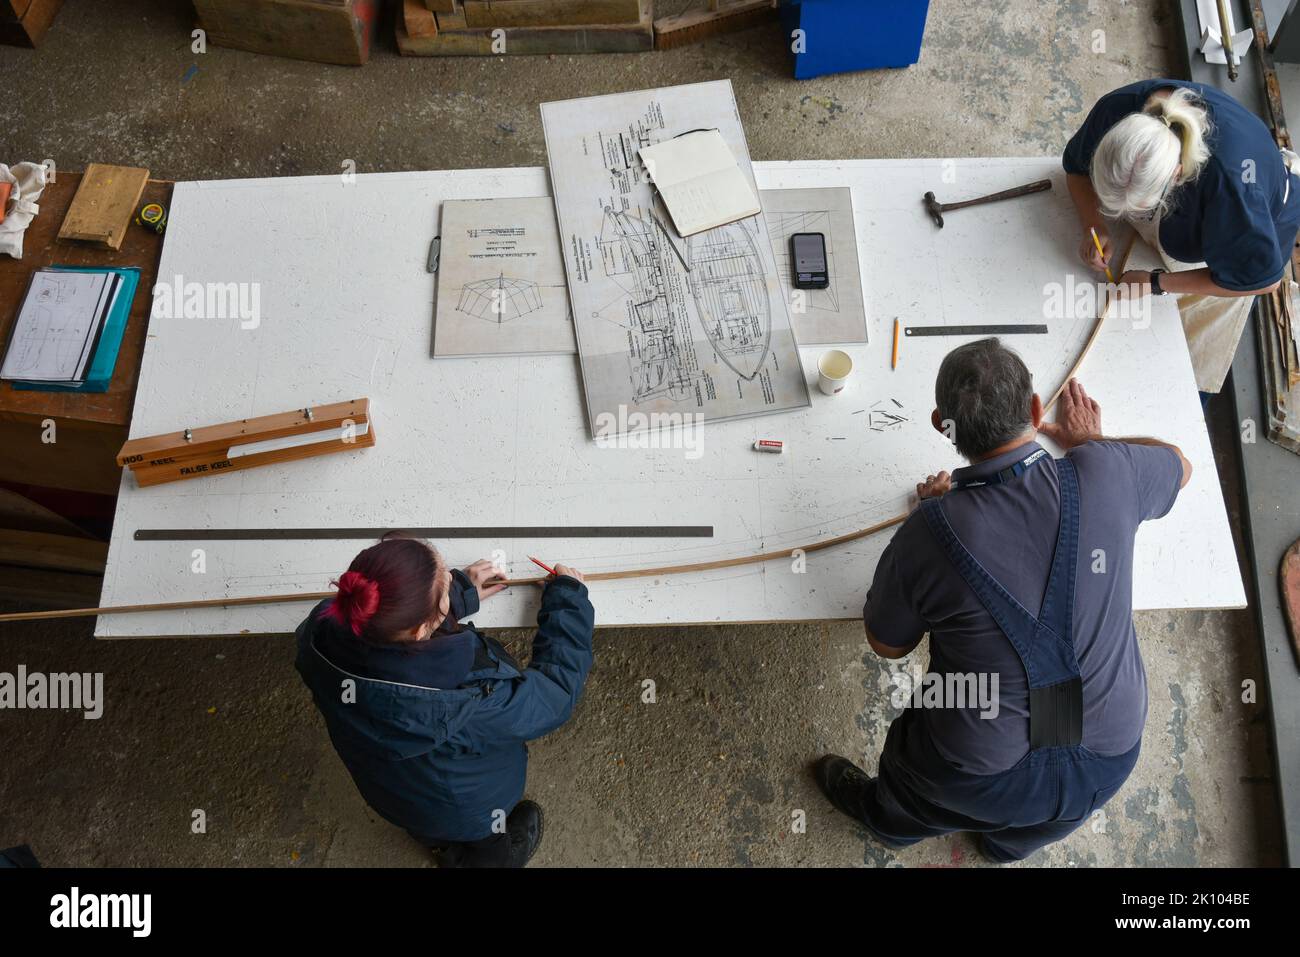 Shipbuilding and repairs inside Boathouse number 4, Portsmouth historic naval dockyard. Staff working to plans on a wooden table. Stock Photo